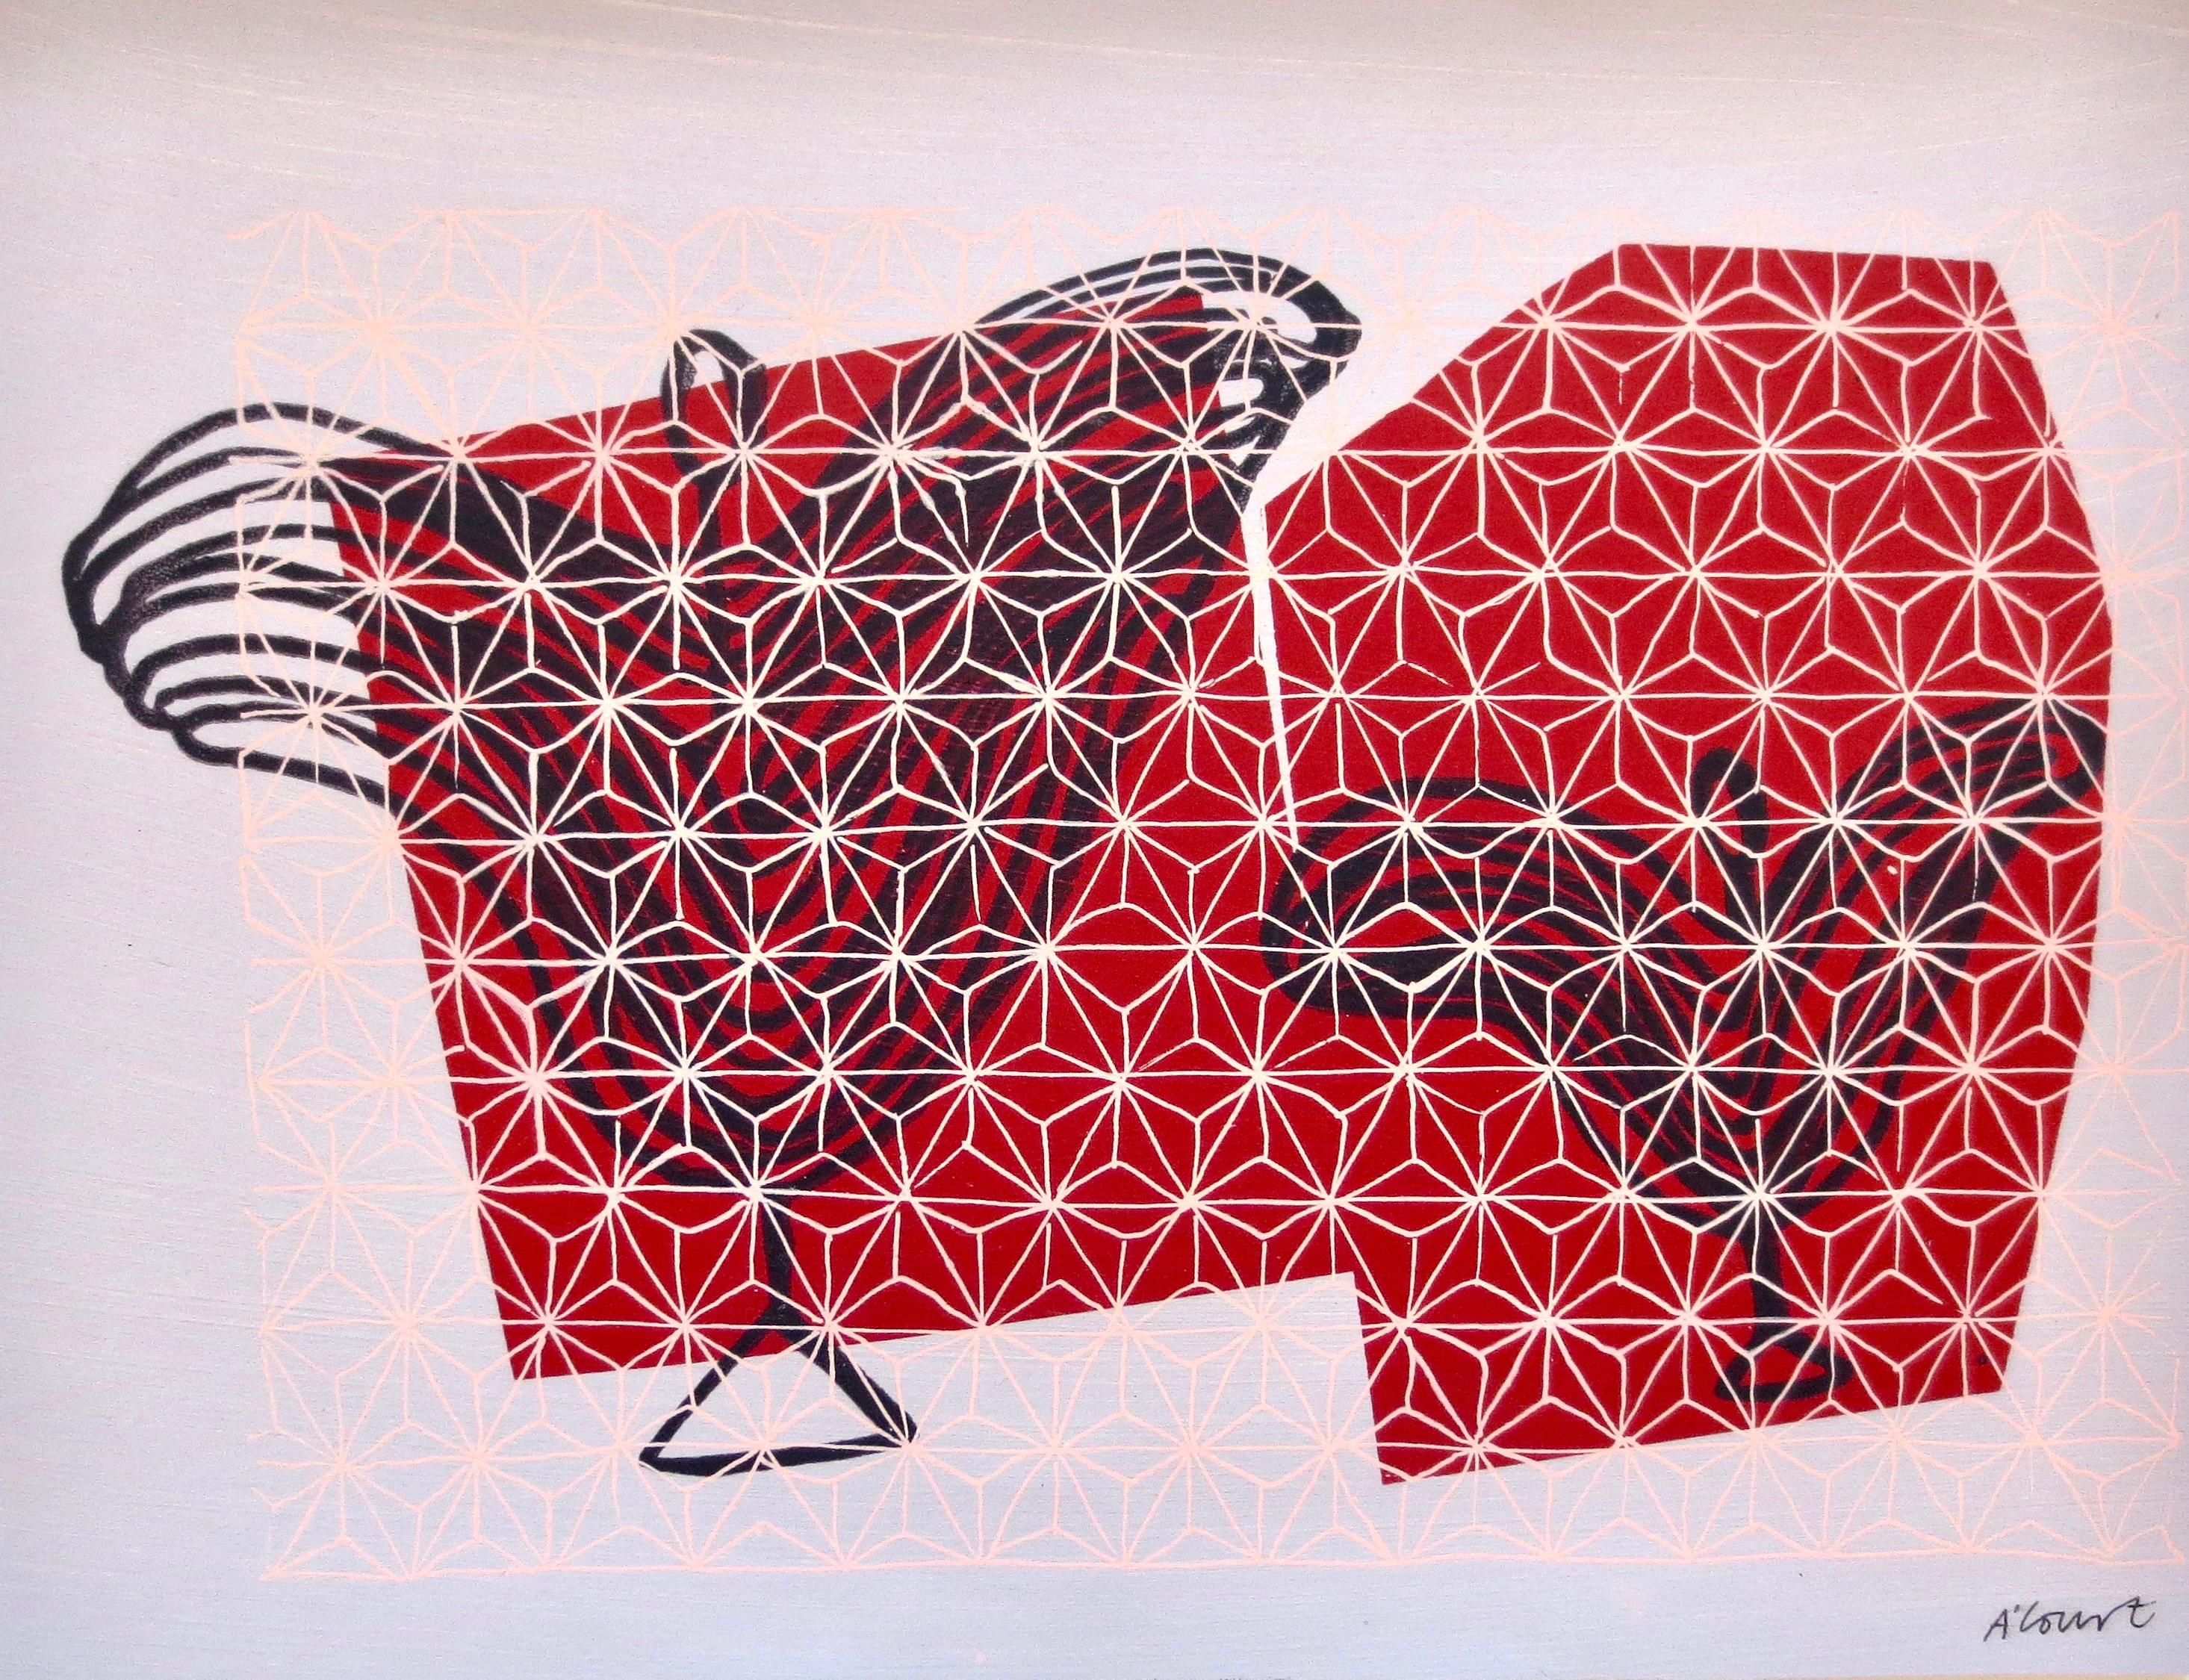 Angel Songs, bright red geometric pattern, work on paper - Mixed Media Art by Angela A'Court